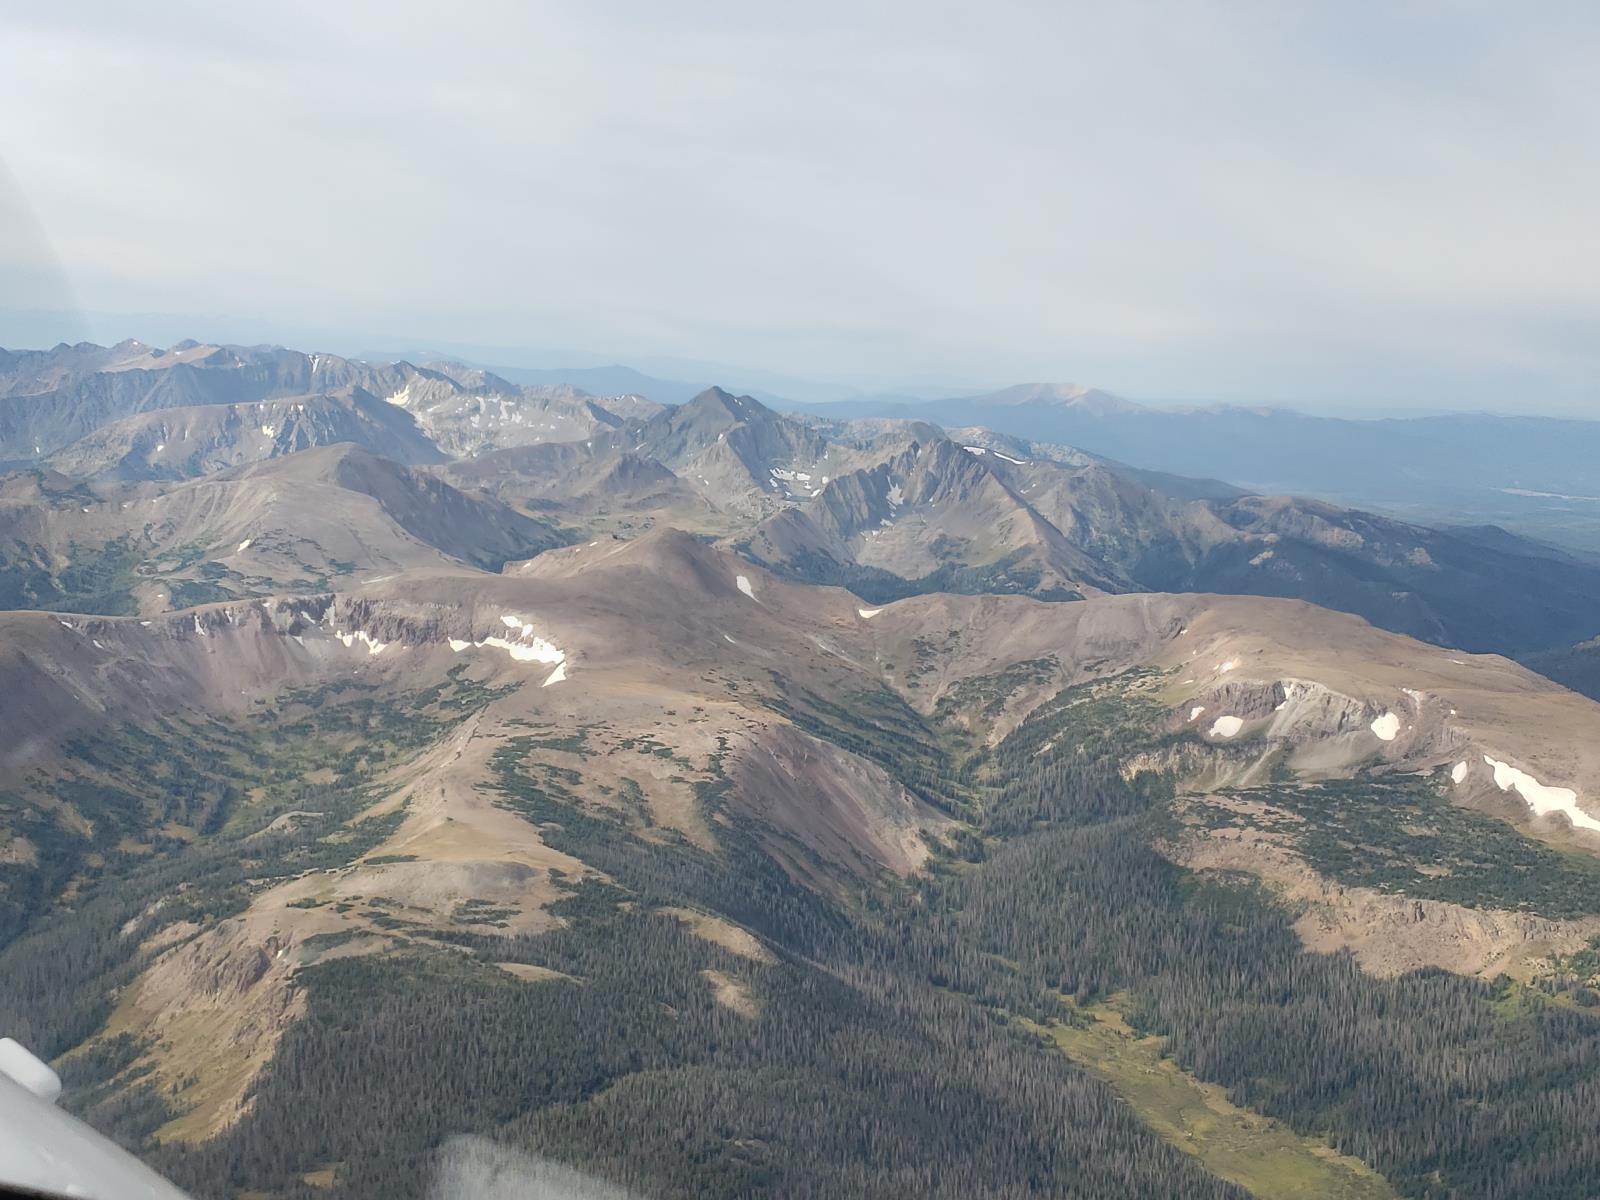 View to the west, flying over Rocky Mountain National Park